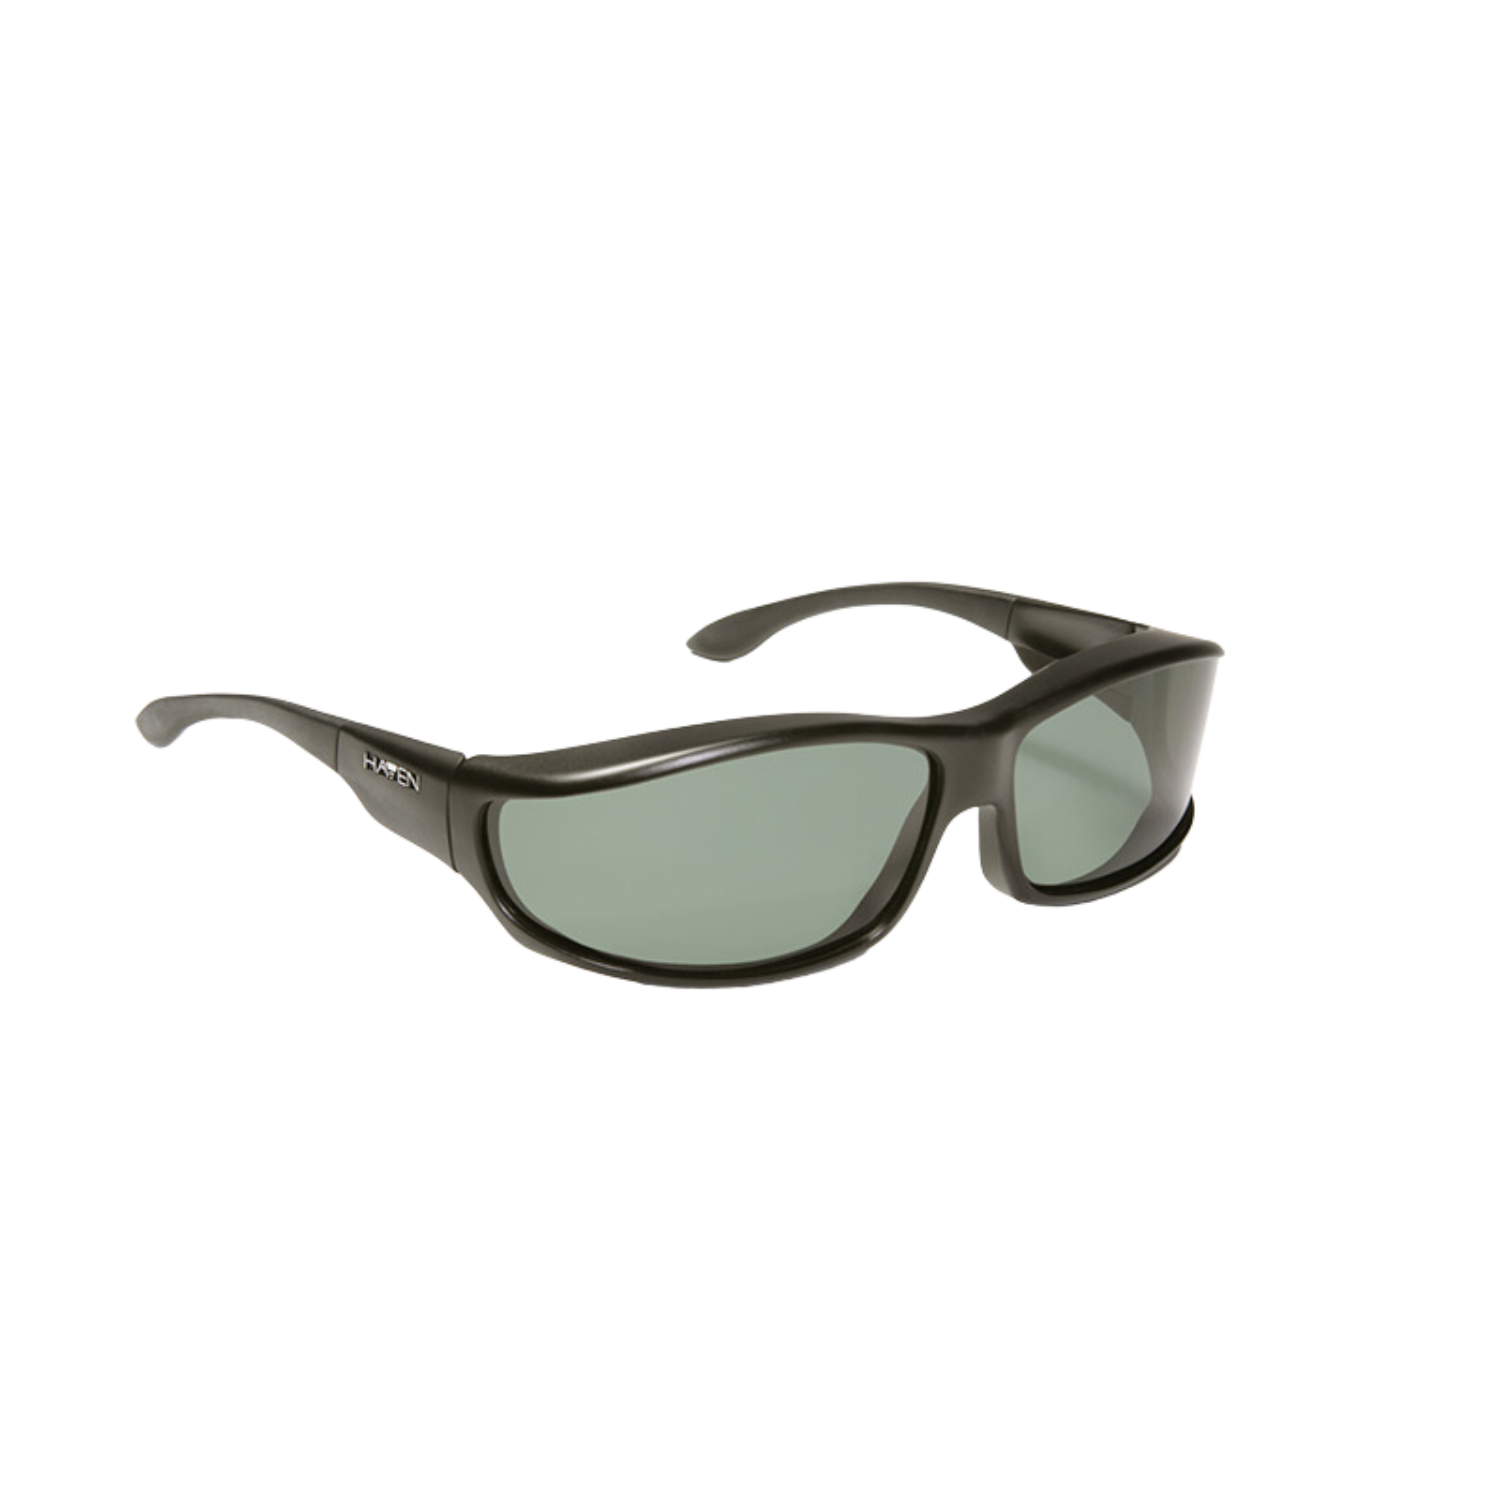 Image of the Haven Hunter polarized fit-over sunglasses with black frames ang gray tint.